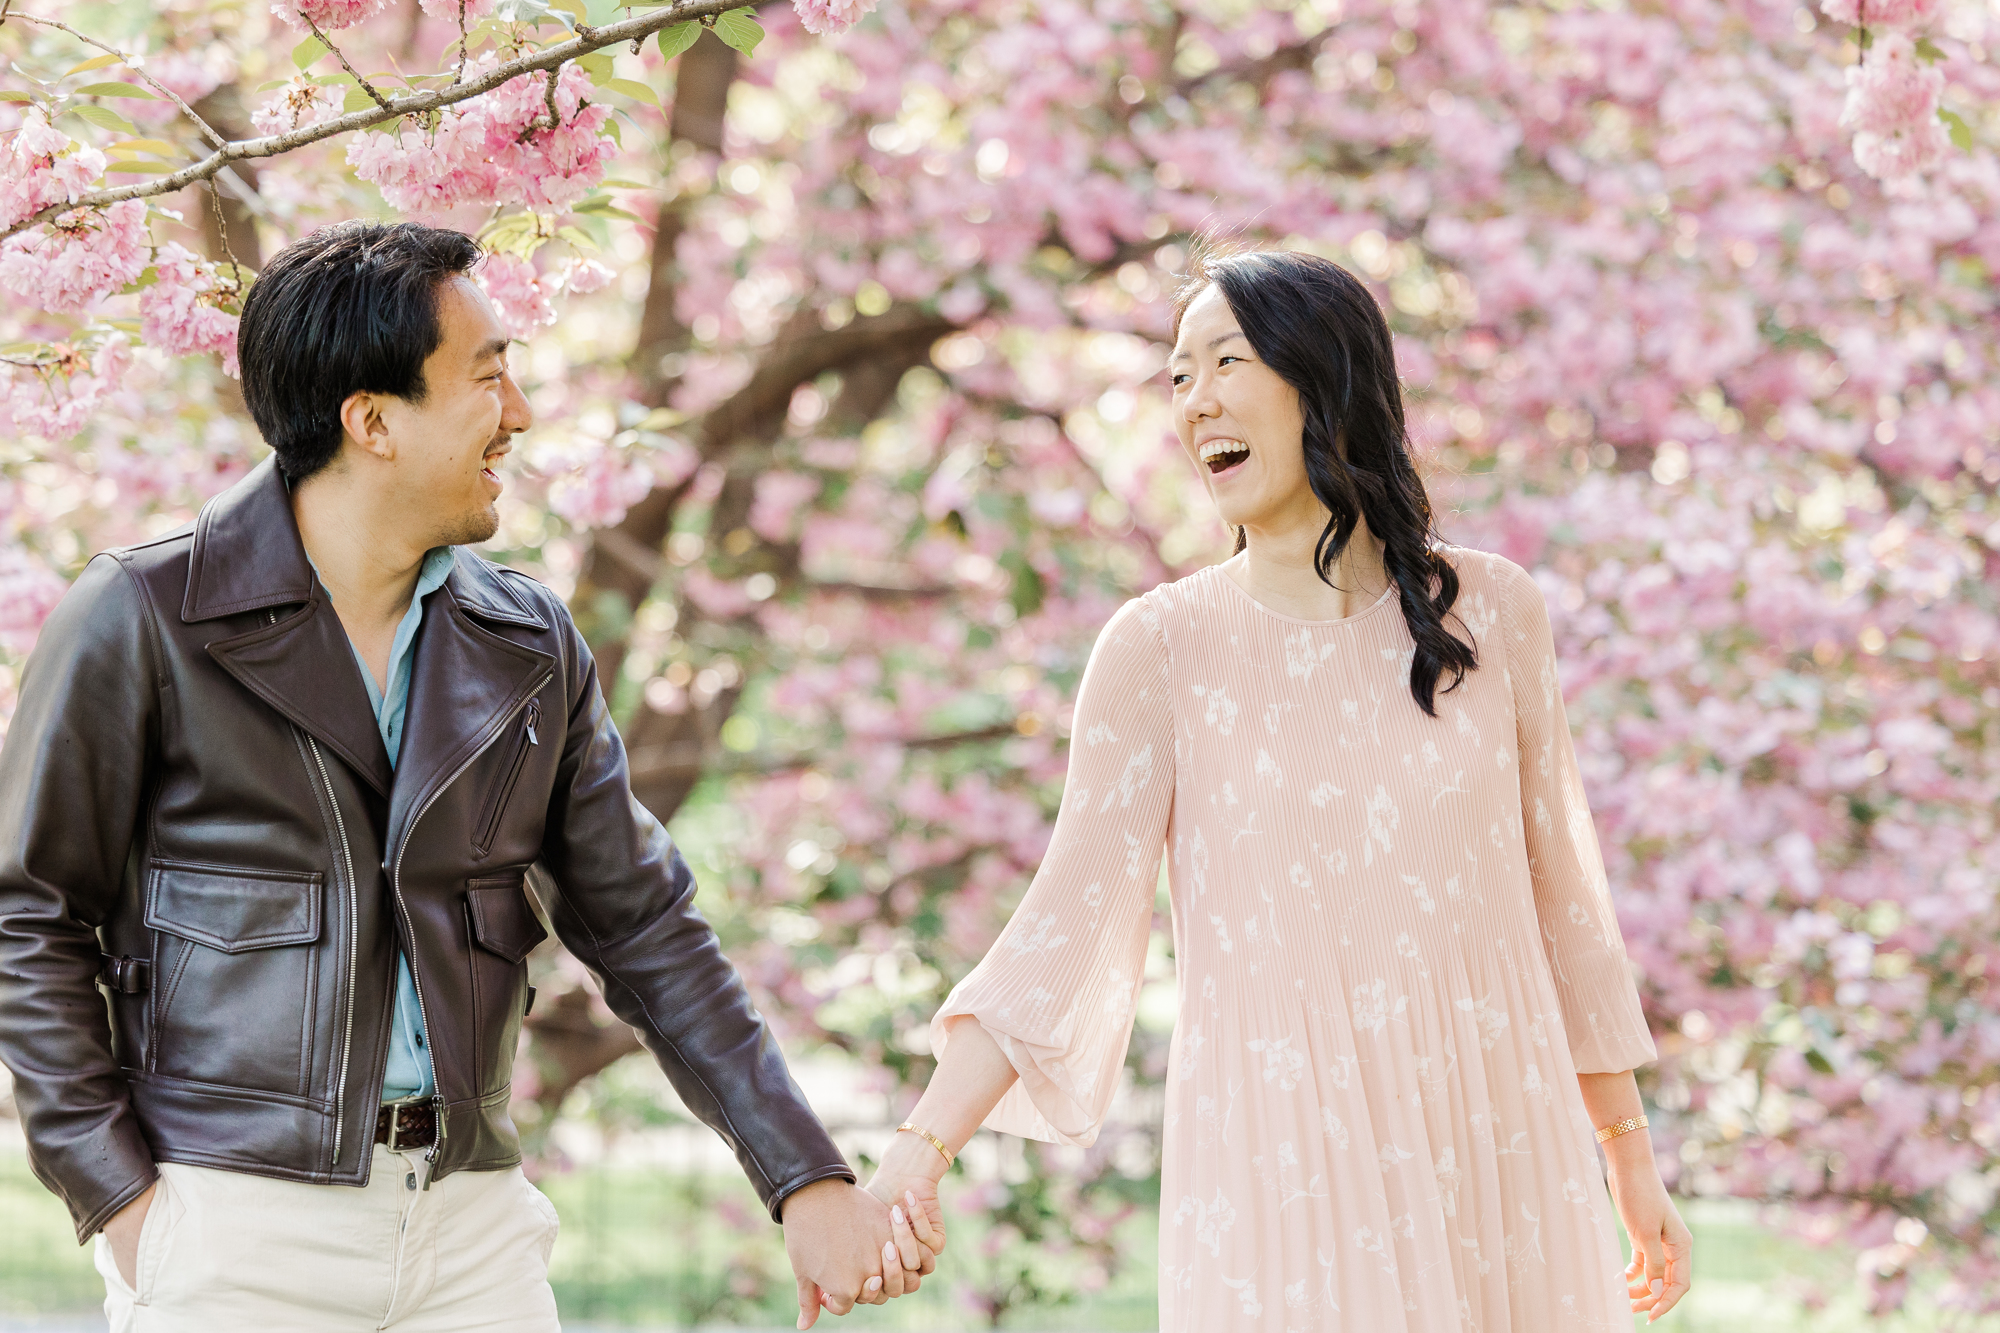 Perfect Engagement Photos With Cherry Blossoms in NYC